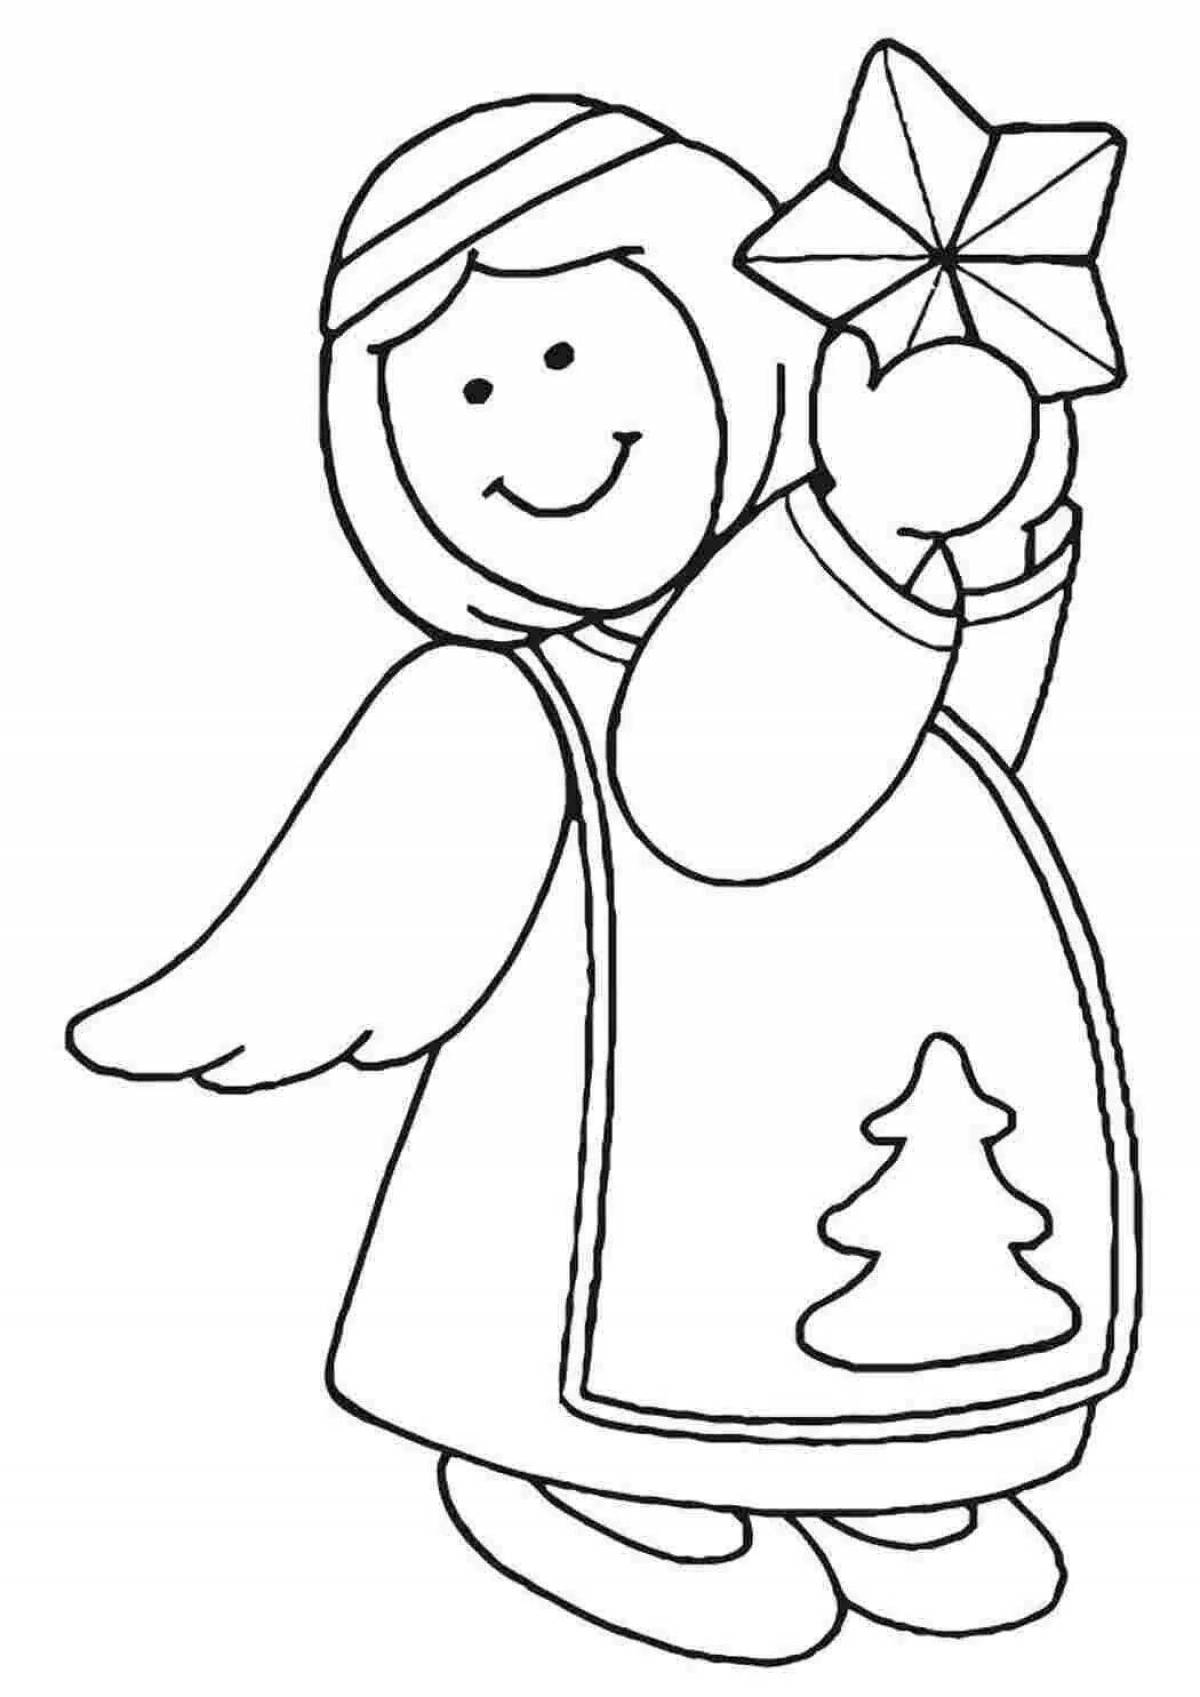 Children's Christmas coloring book